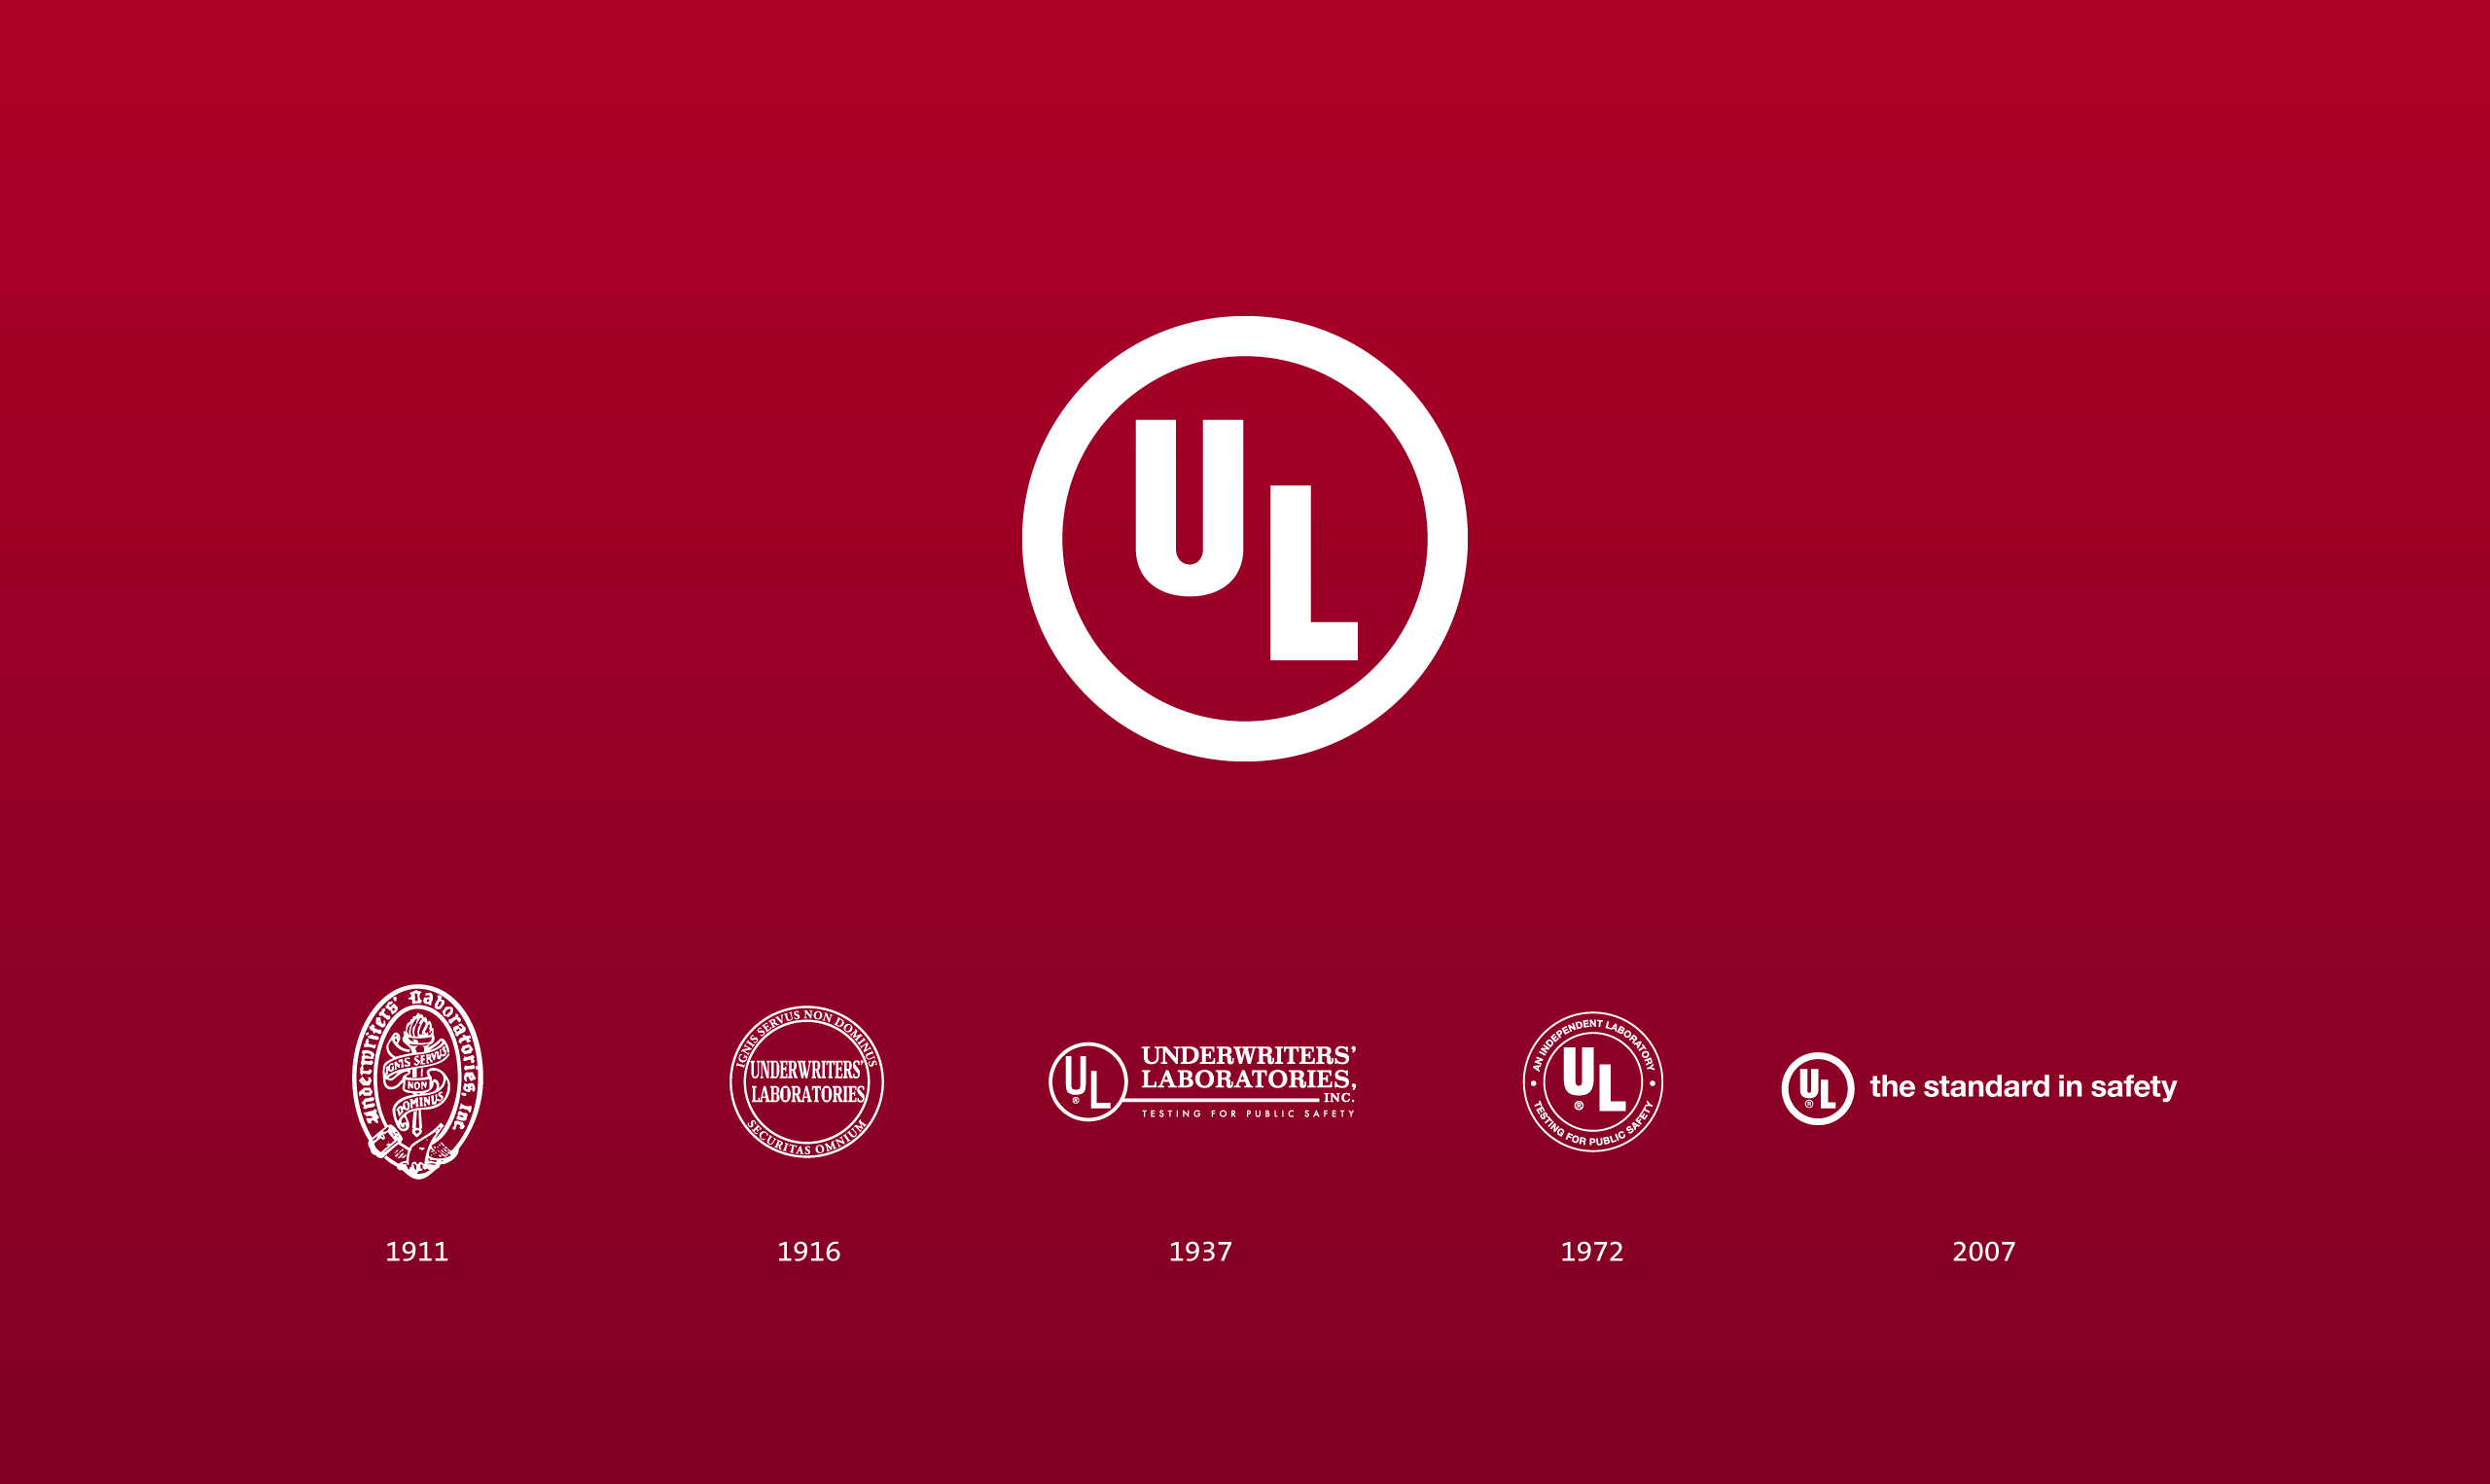 The ul logo on a red background.